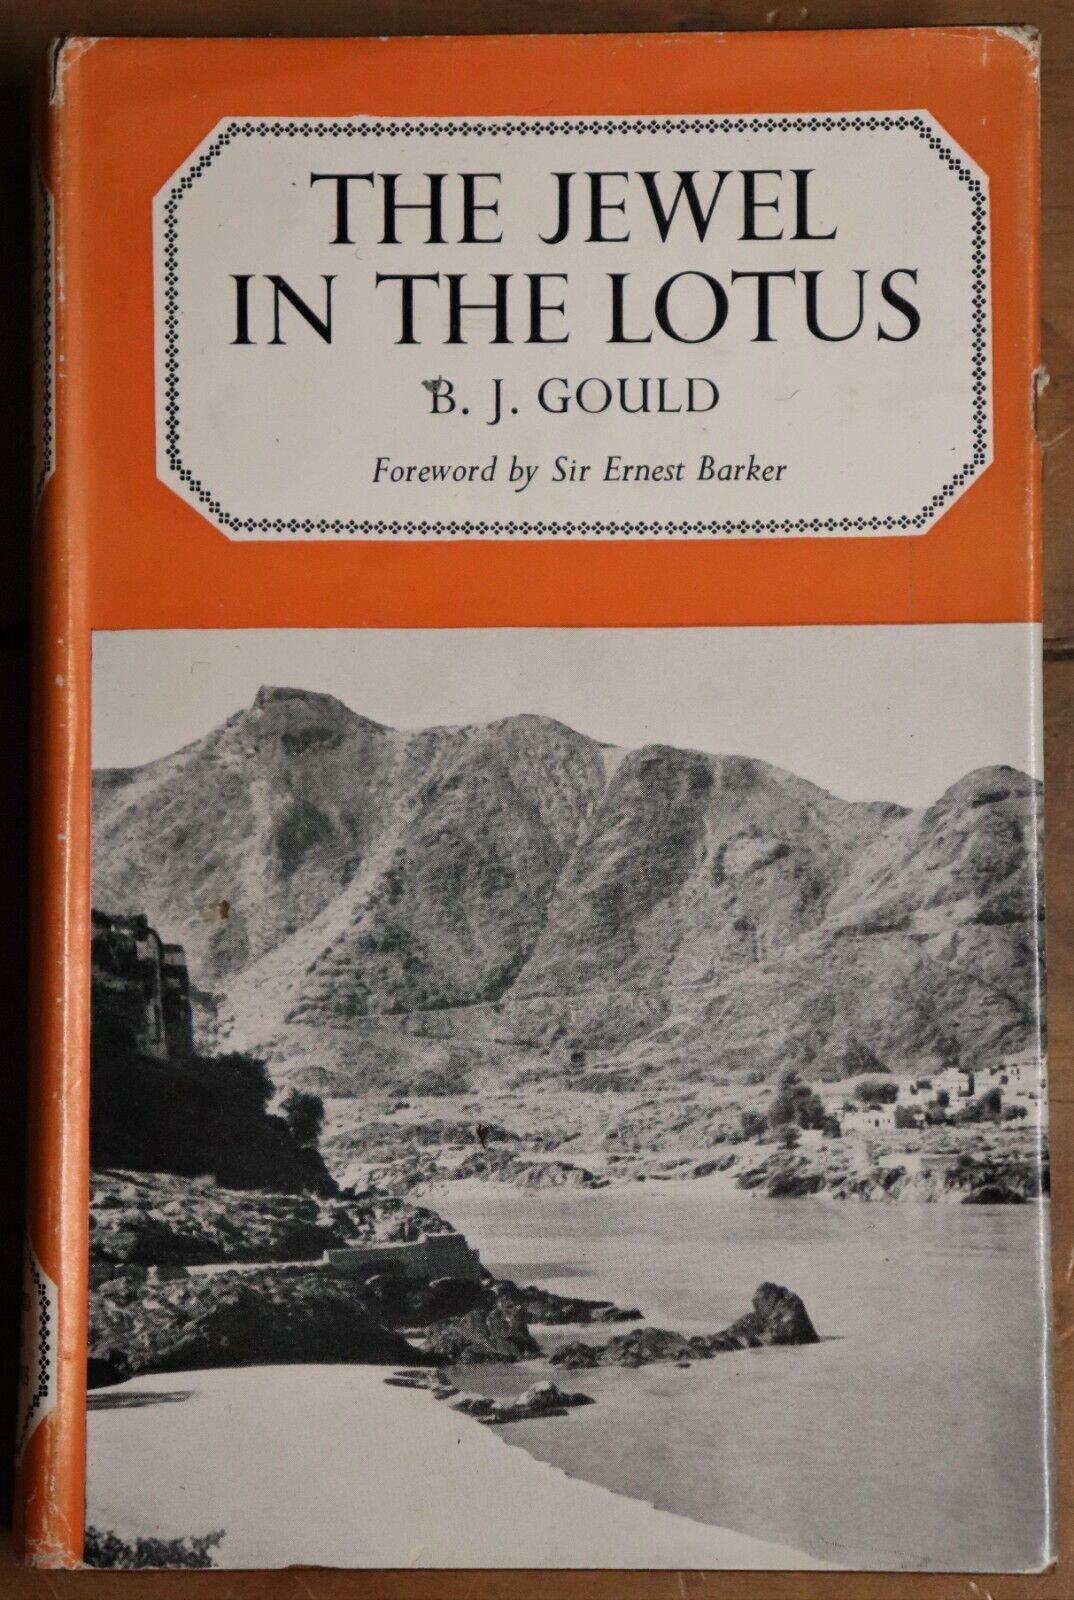 The Jewel in the Lotus - 1957 - BJ Gould 1st Edition Antiquarian Book